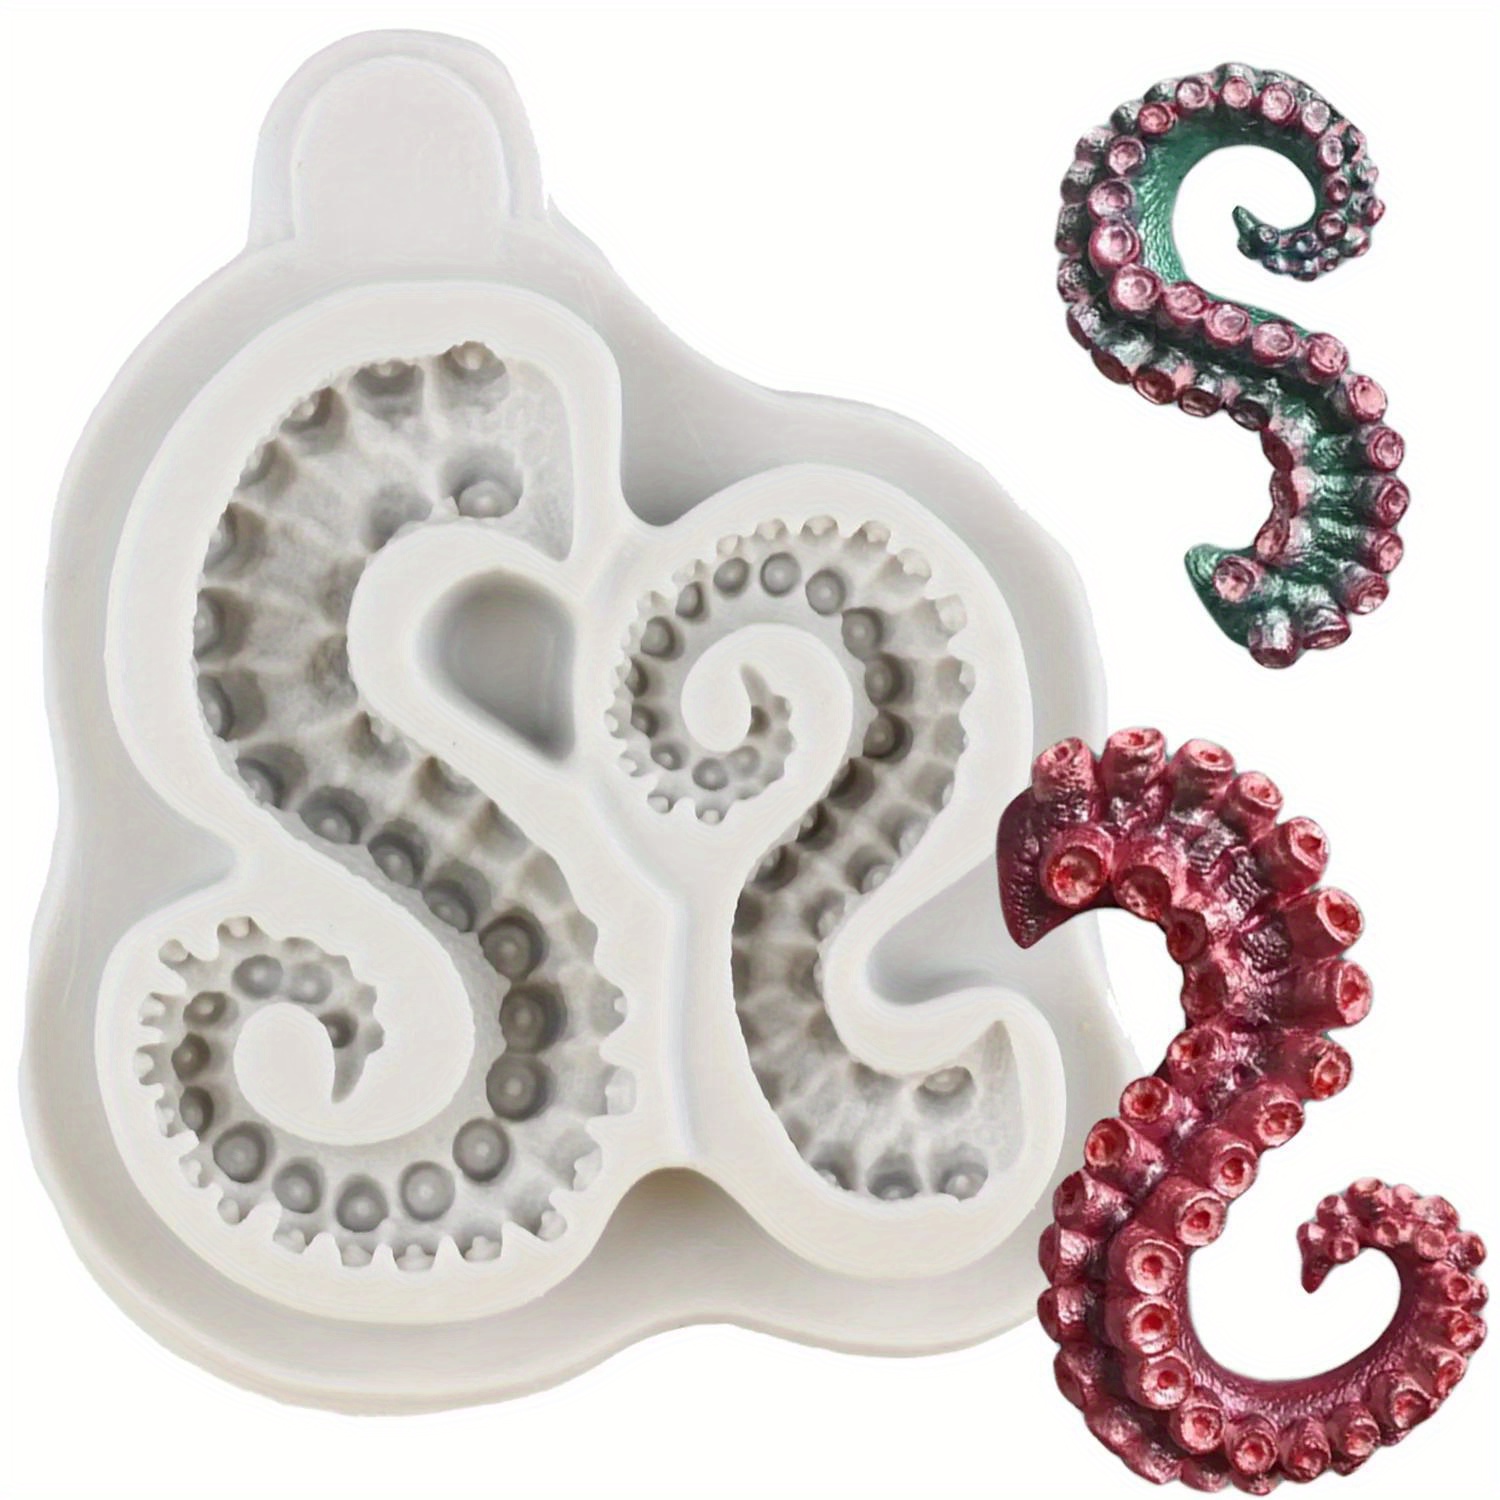 

1pc Sea Octopus Tentacles Silicone Mold Cupcake Fondant Molds Cake Decorating Tools Candy Polymer Clay Chocolate Gumpaste Moulds